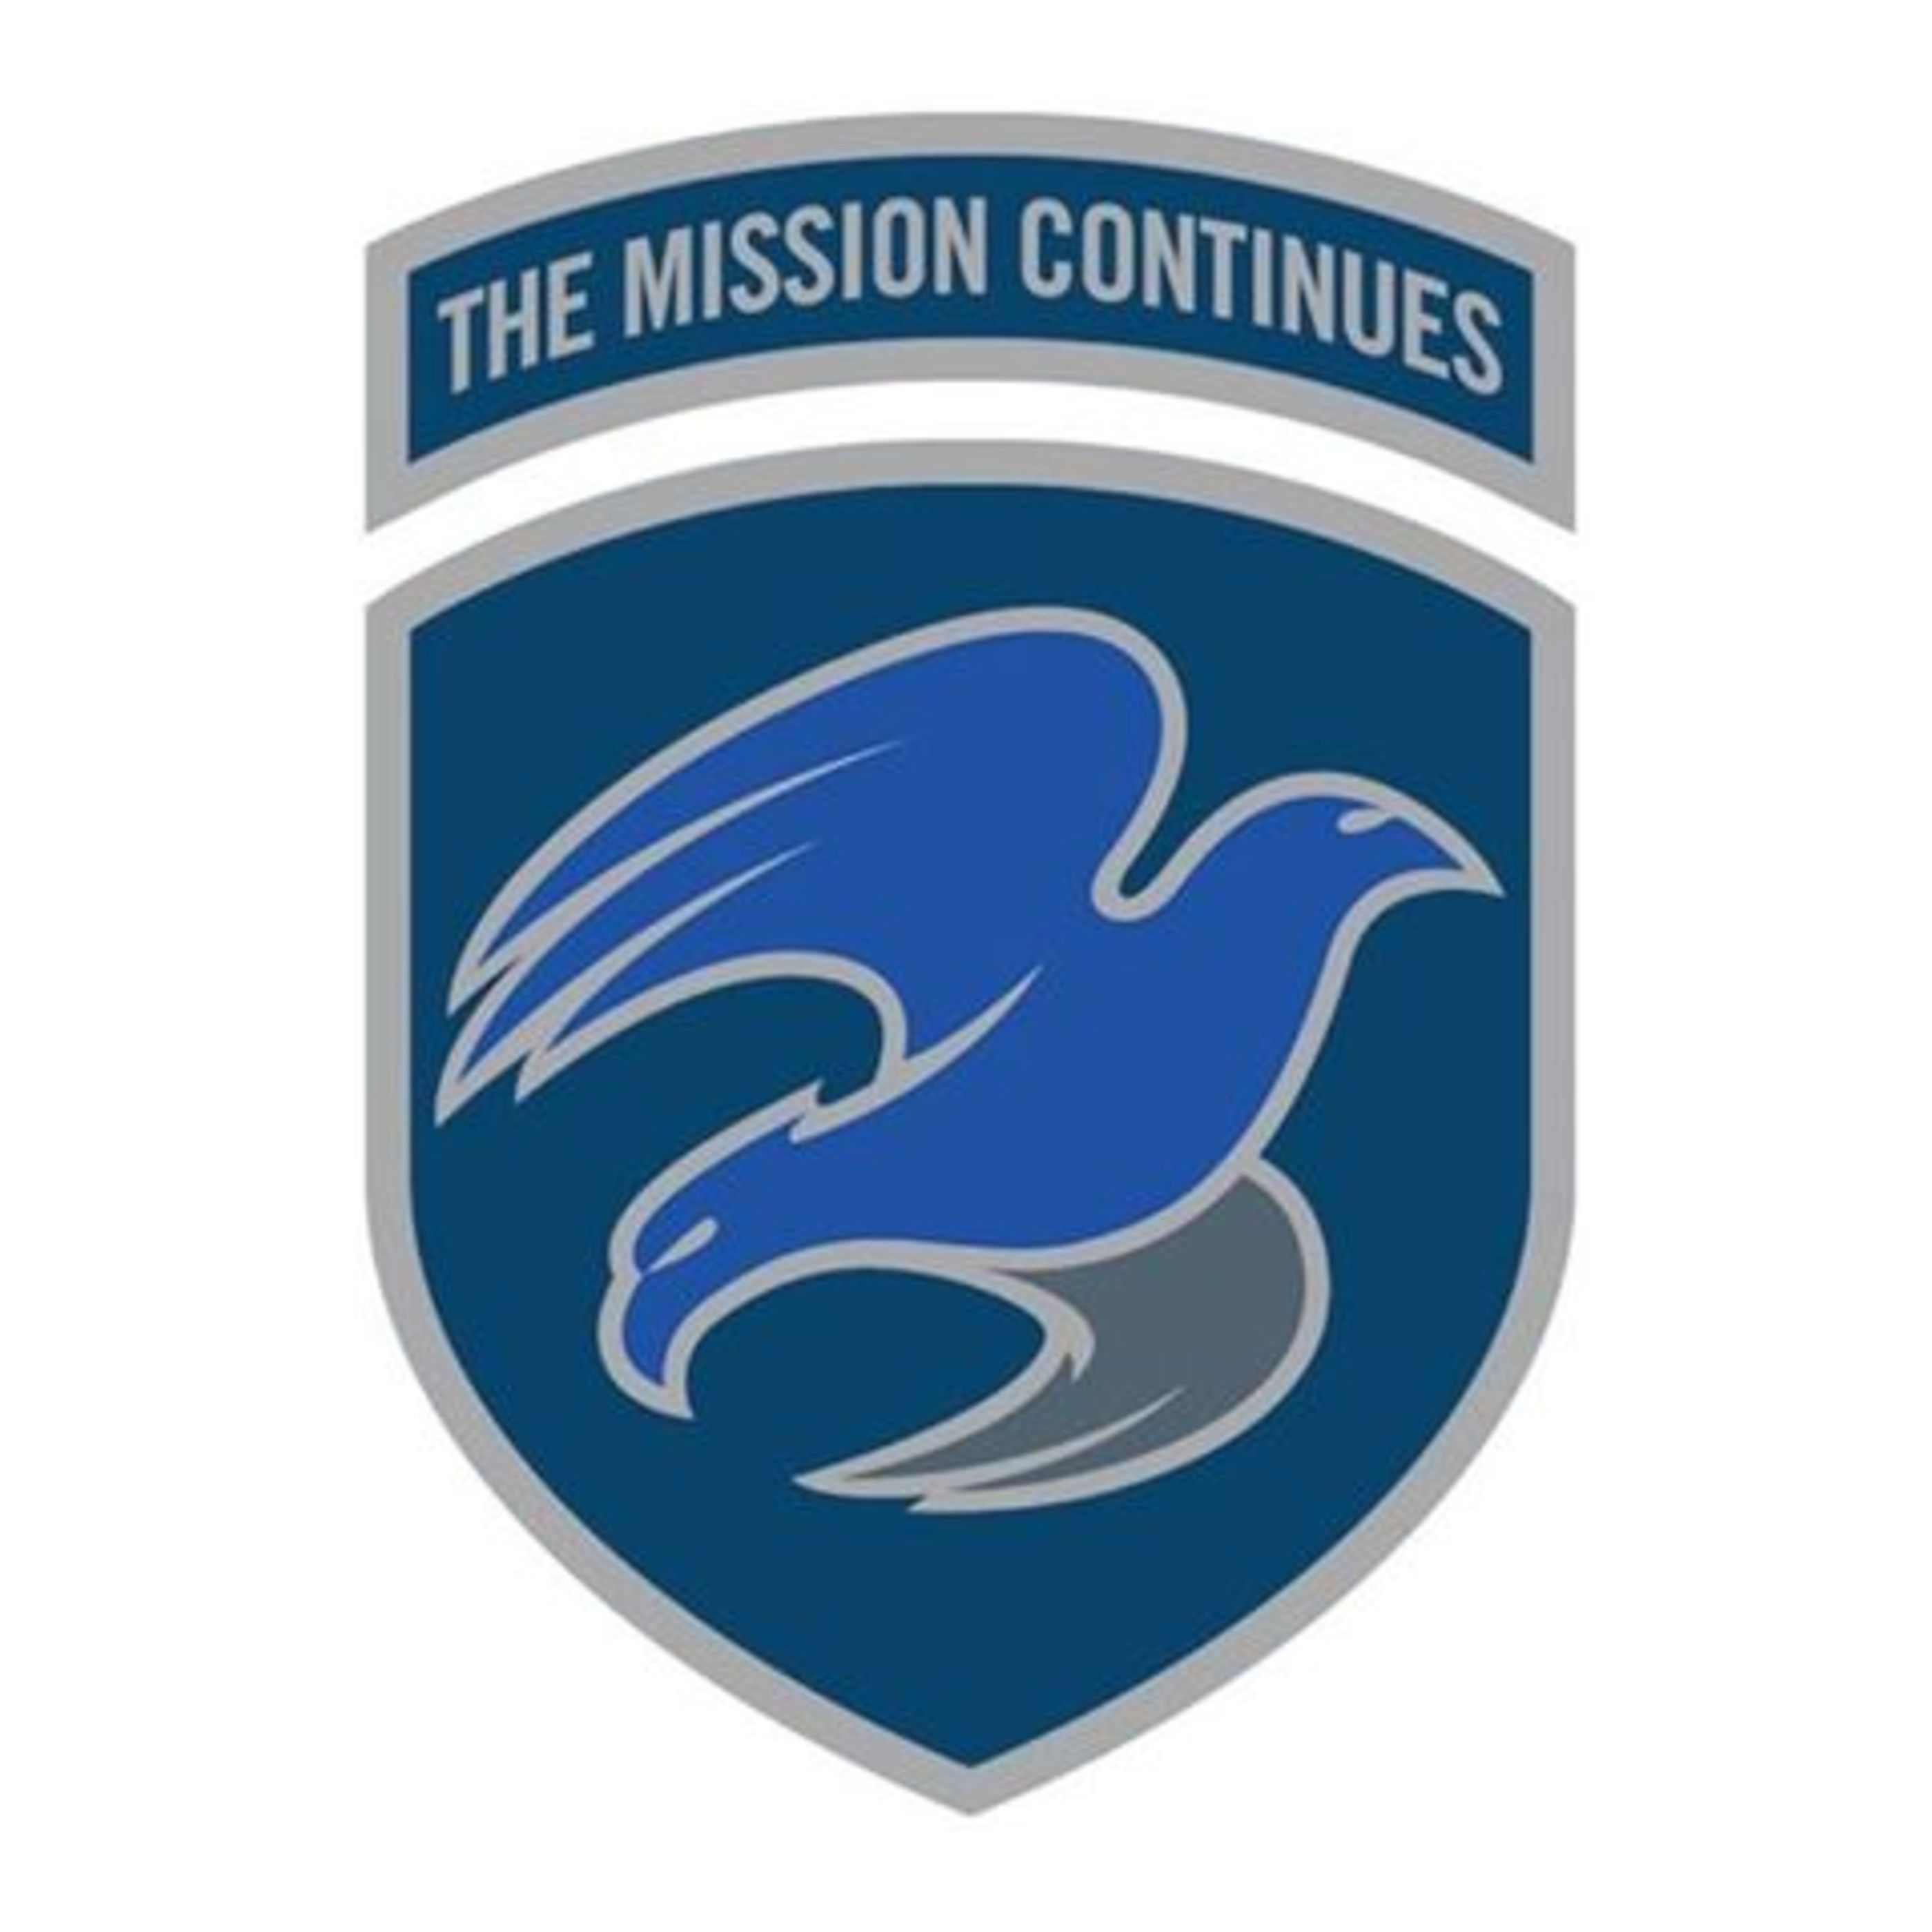 Episode 12: The Mission Continues: Empowering Veterans To Keep Serving and Succeeding